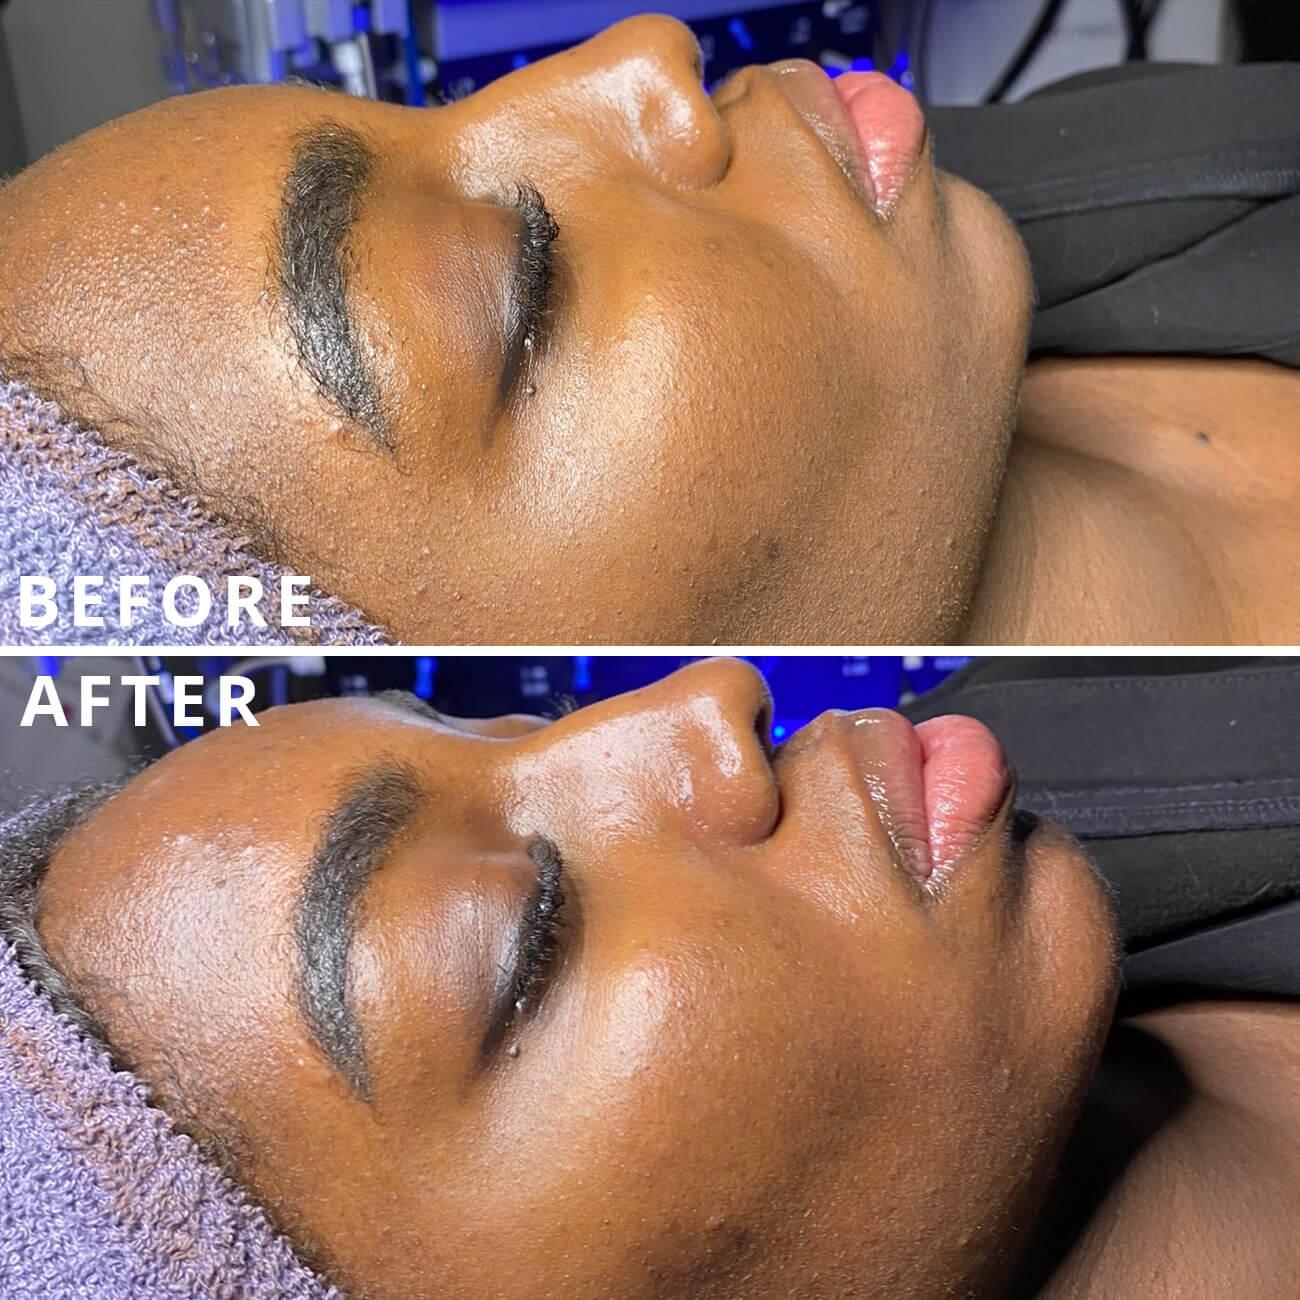 Ethnic woman with amazing before and after hydrafacial to her face by Haus of Aesthetics.